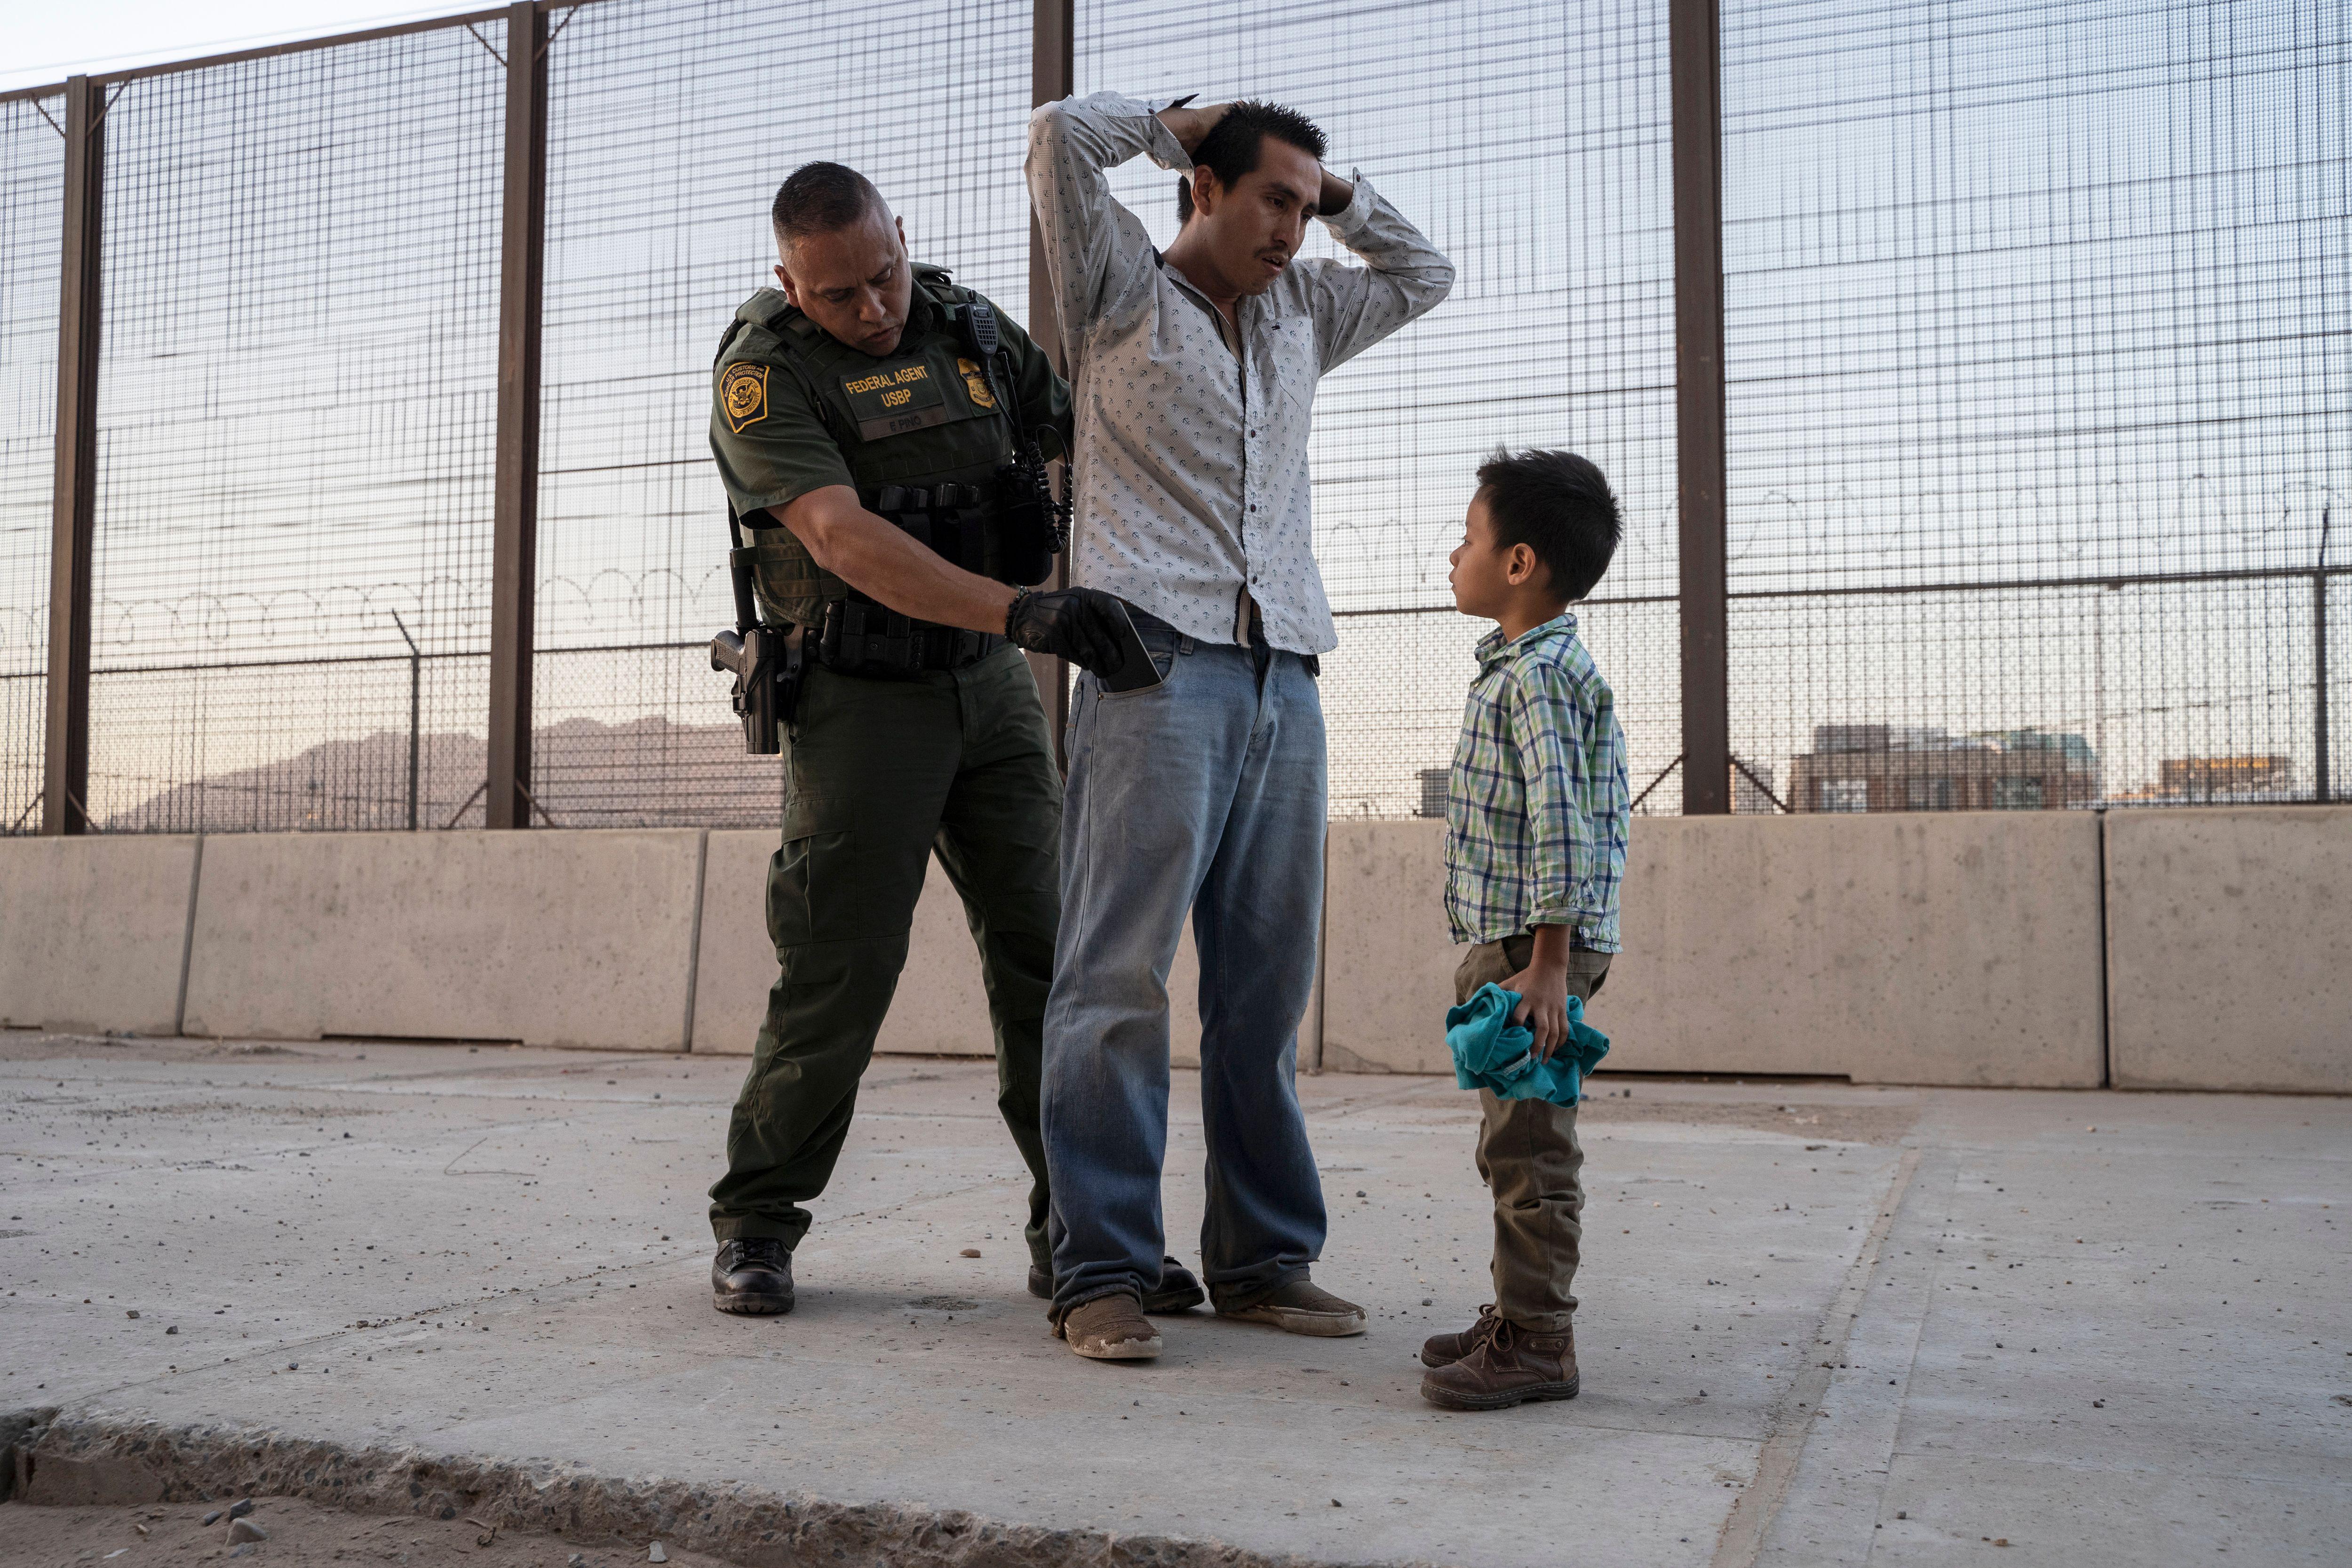 A migrant father has his hands clasped behind his head as a CBP agent searches his pockets. The migrant's son looks on.